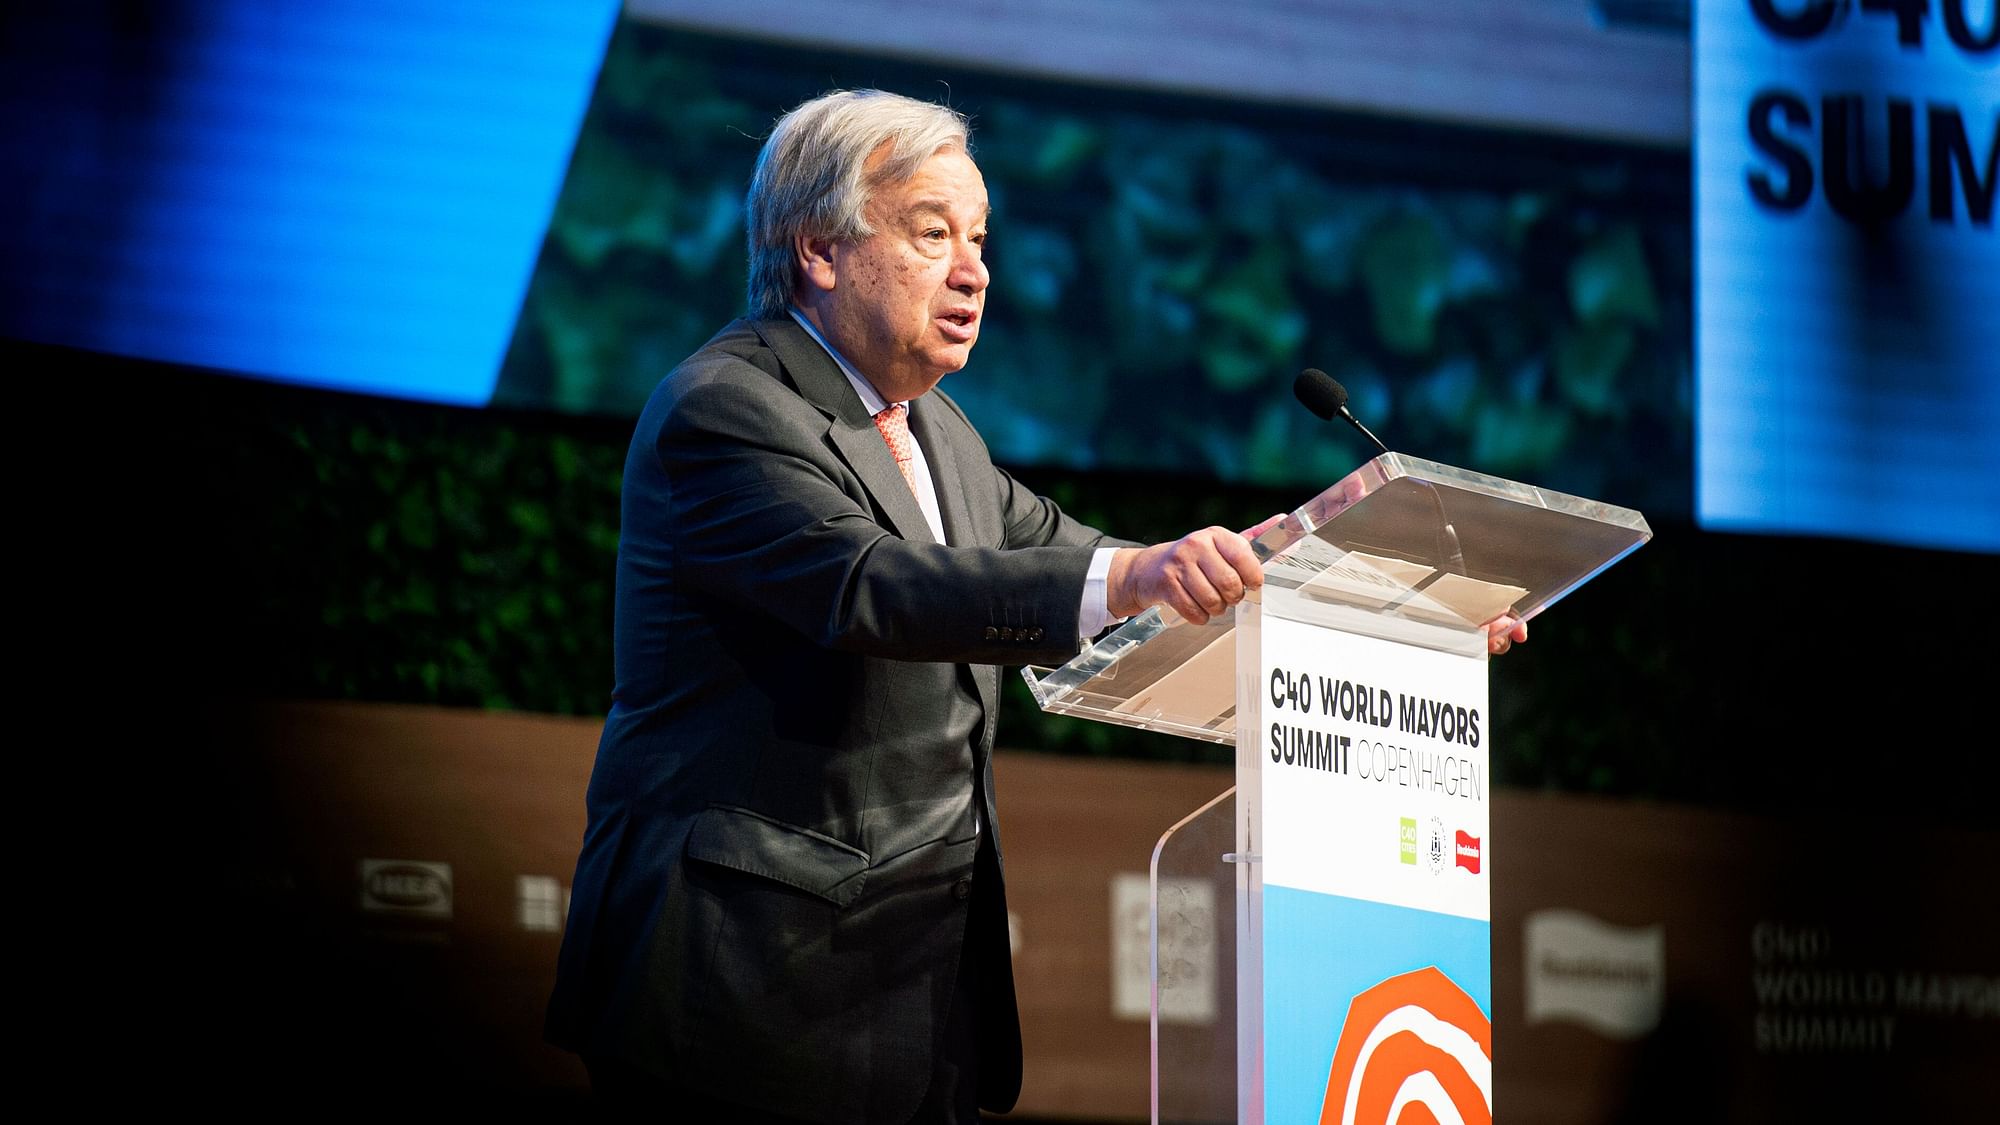 Antonio Guterres, Secretary-General of the United Nations delivers a speech at the C40 World Mayors Summit in Copenhagen, Denmark